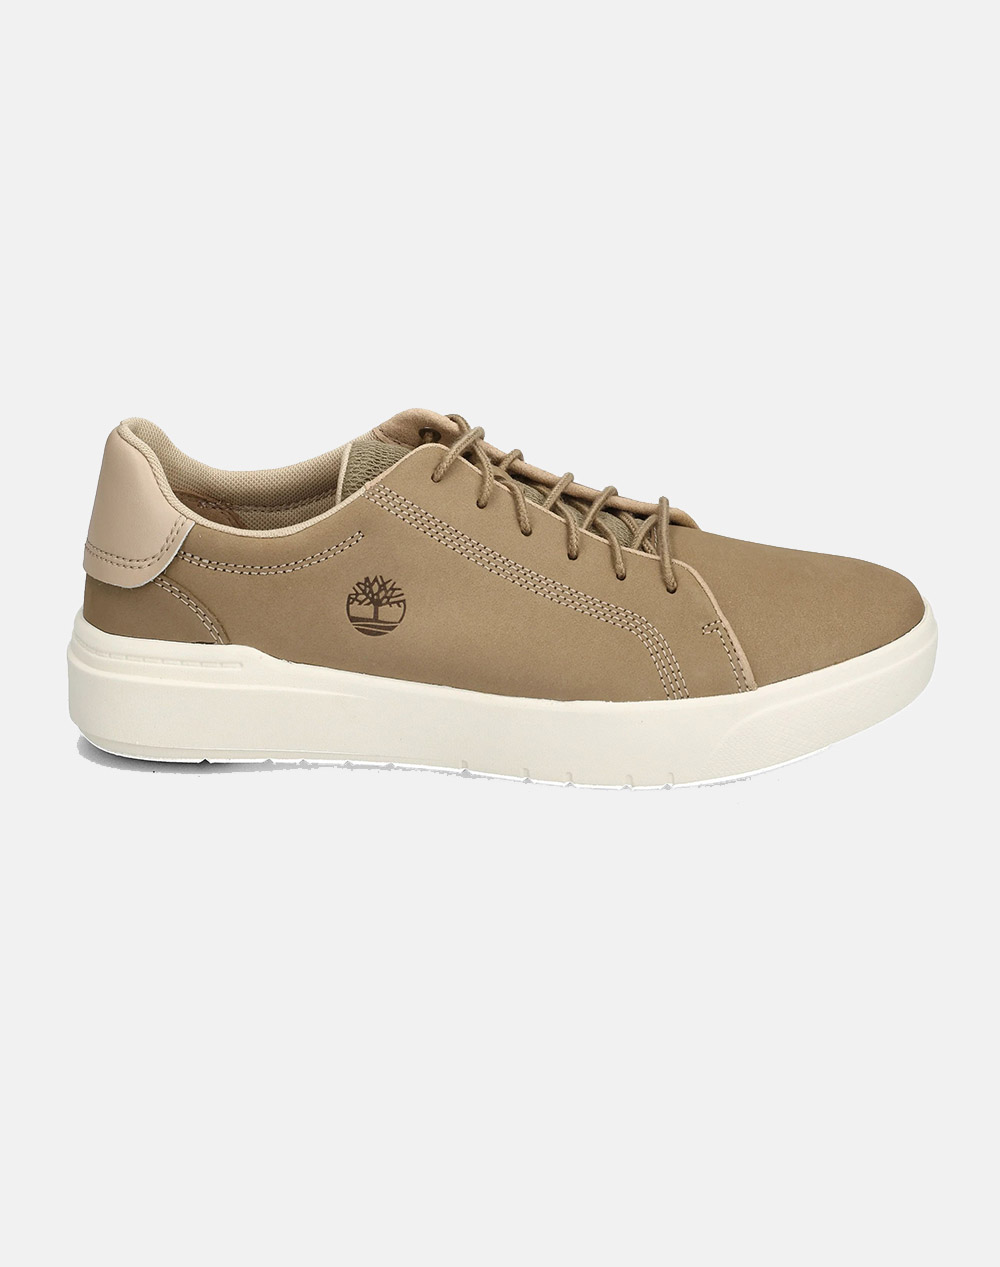 TIMBERLAND SEBY LOW LACE SNEAKER TB0A5TY5-DR0 Biege